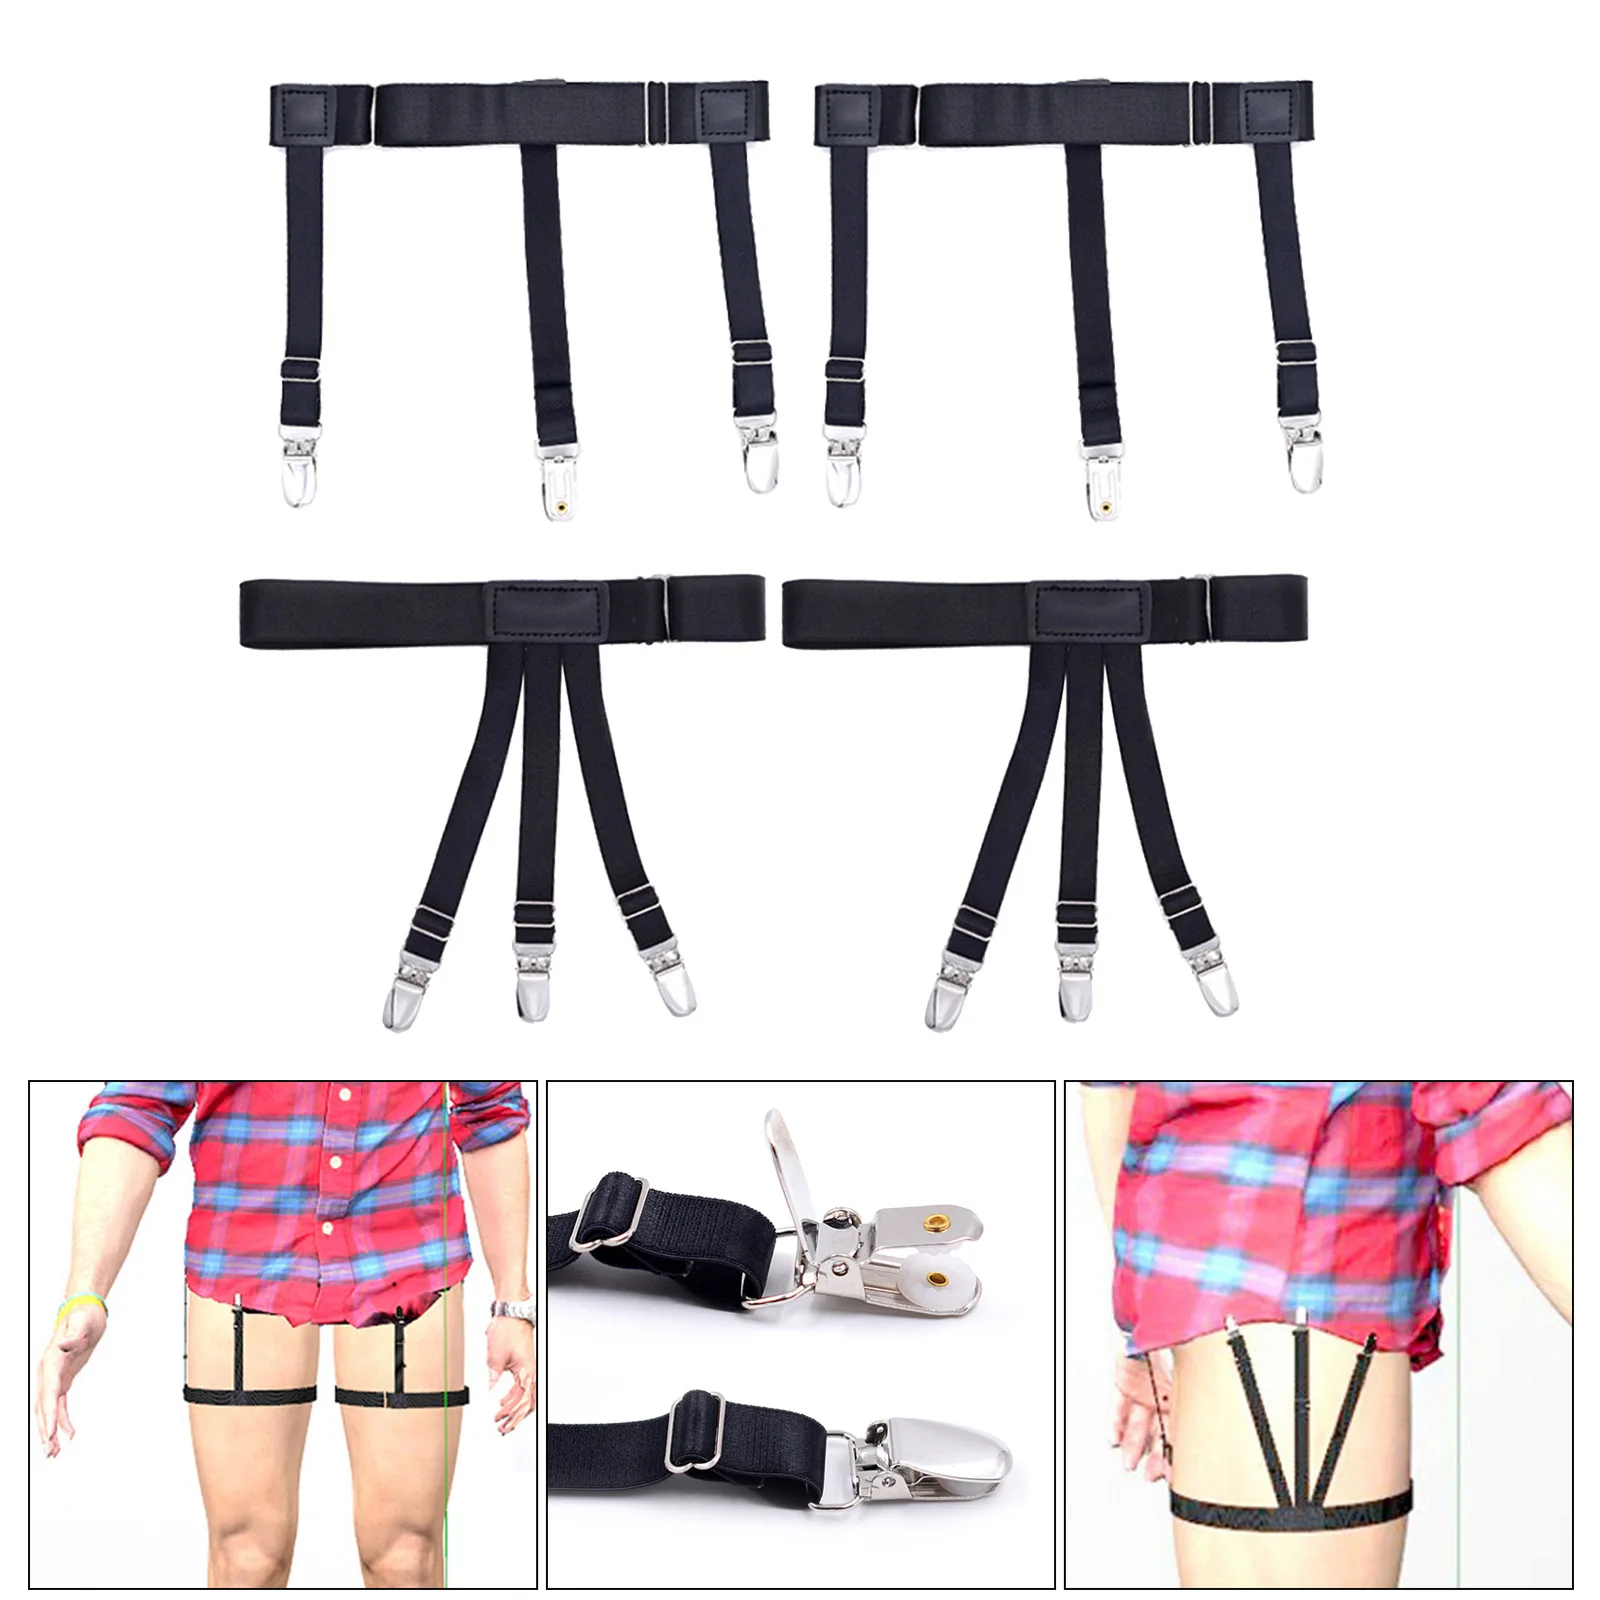 2x  Leg Garter Style  Shirt Holders Adjustable Elastic Shirts Garters with Non-Slip Clips for Professional Business Men